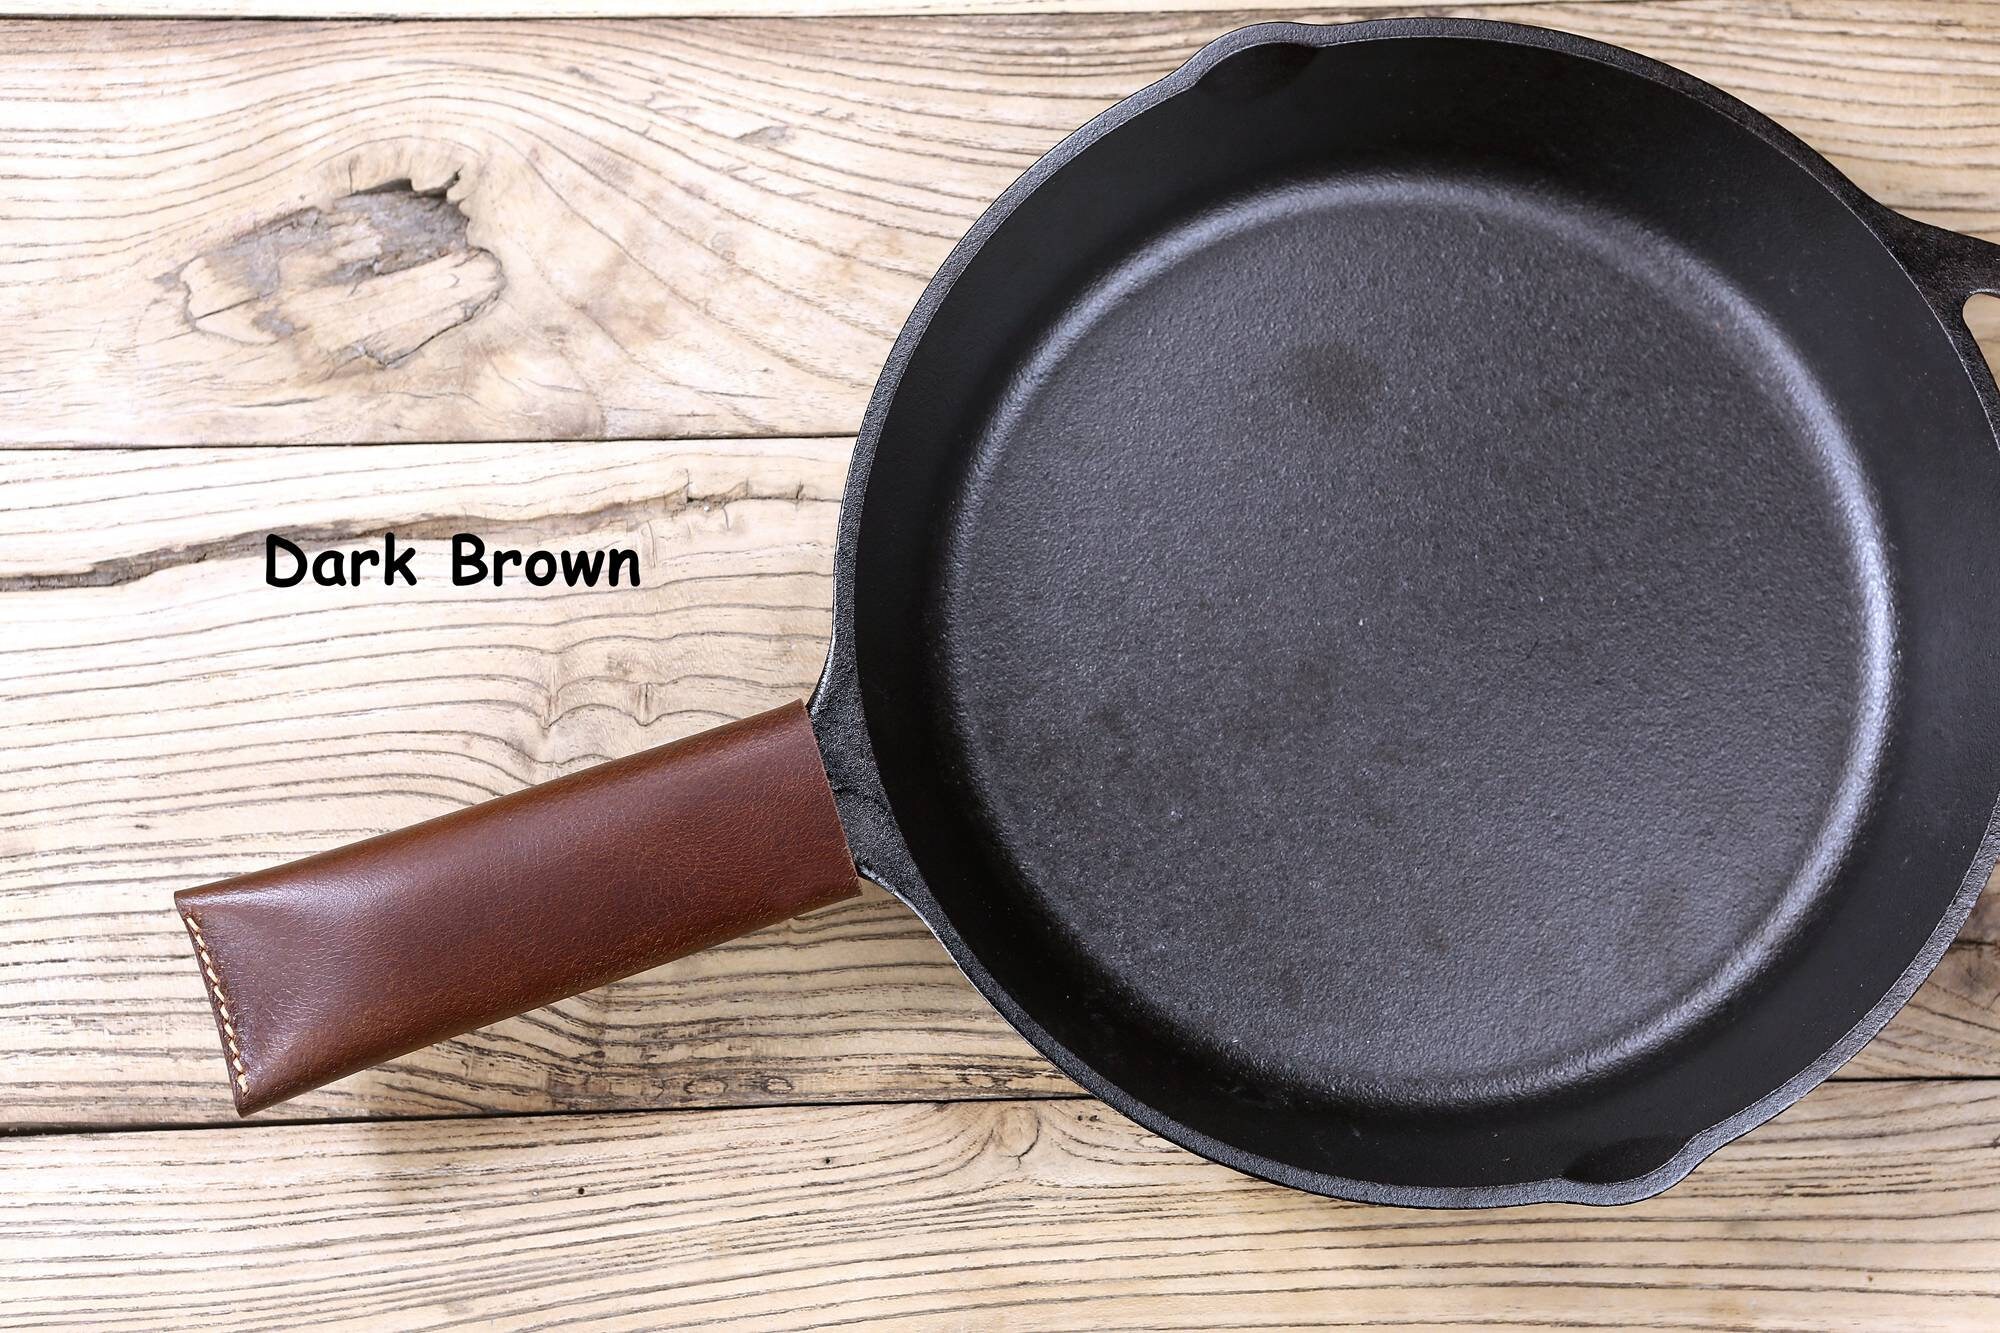 BTLUX Cast Iron Handle Cover, Set of 2 - Extra Thick Leather Heat Resistant  Handle Holder for Cast Iron Skillets, Pans - Made in Georgia